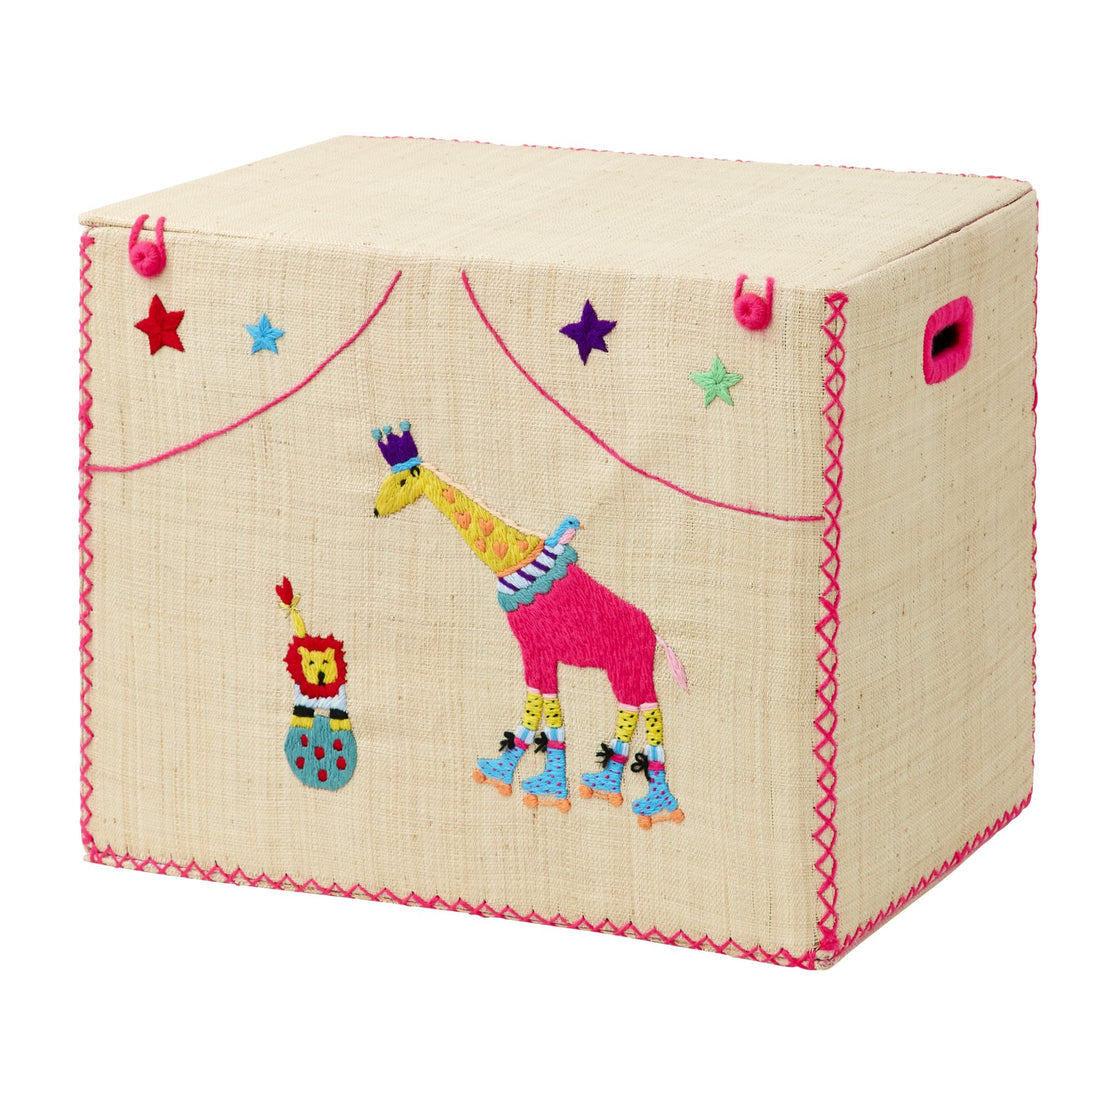 Rice DK Giraffe and Lion Large Foldable Basket in Circus Design